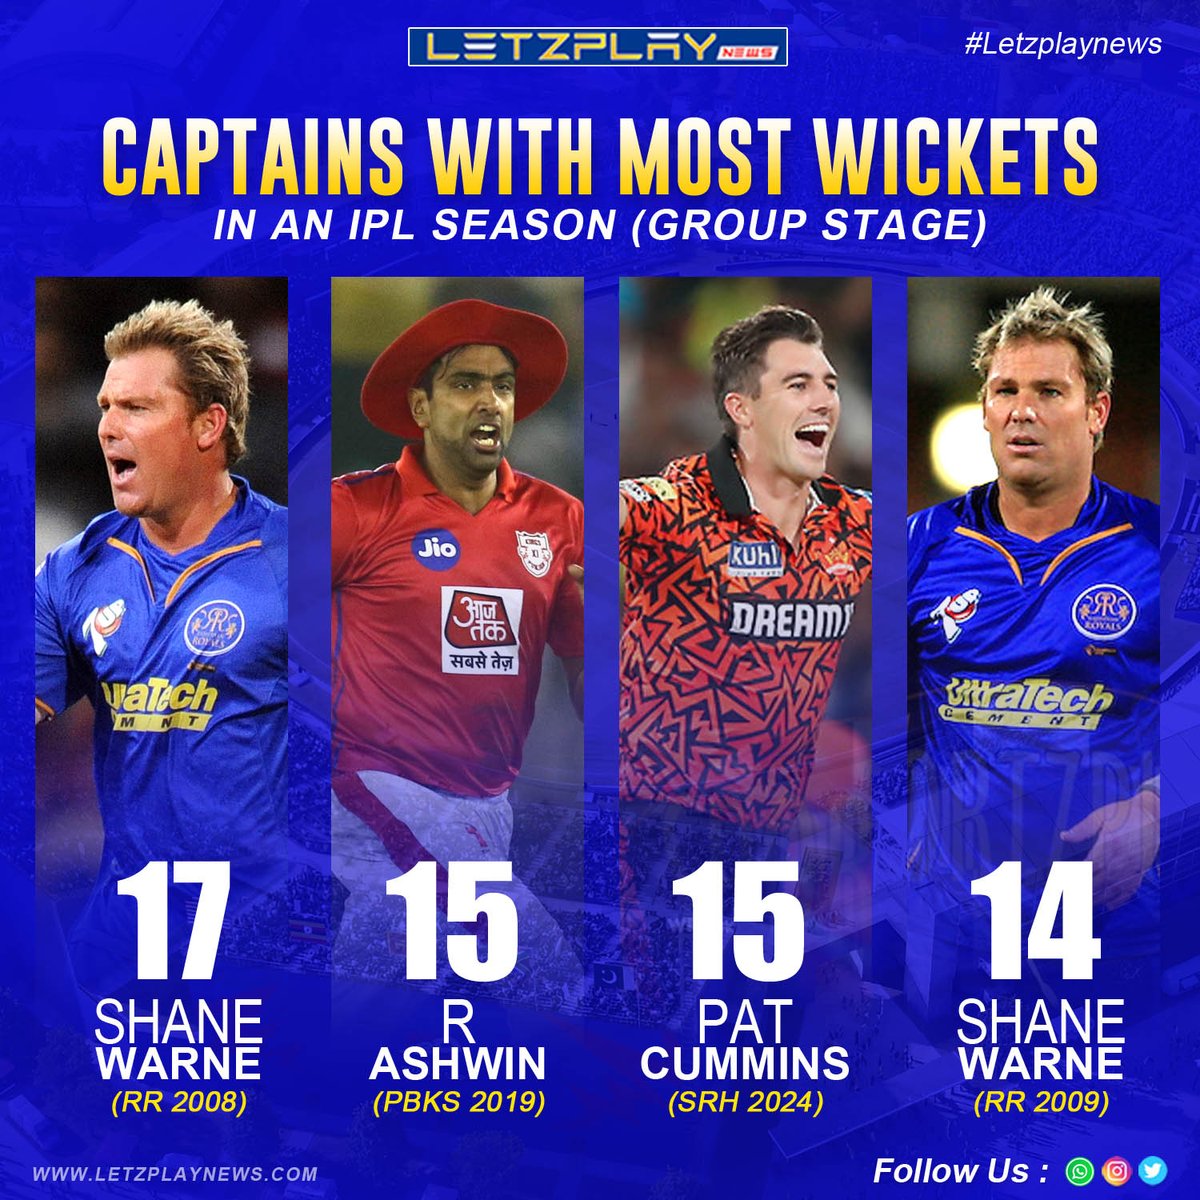 Pat Cummins has matched Ravichandran Ashwin's record for the most wickets taken by a captain in the IPL group stage! 🎉🏏 

Will he break the record in the playoffs? 🔥

.
#IPL2024 #IPL #PatCummins #SRH #CricketRecords #CaptainFantastic #CricketUpdates #Ashwin #SportsNews #news